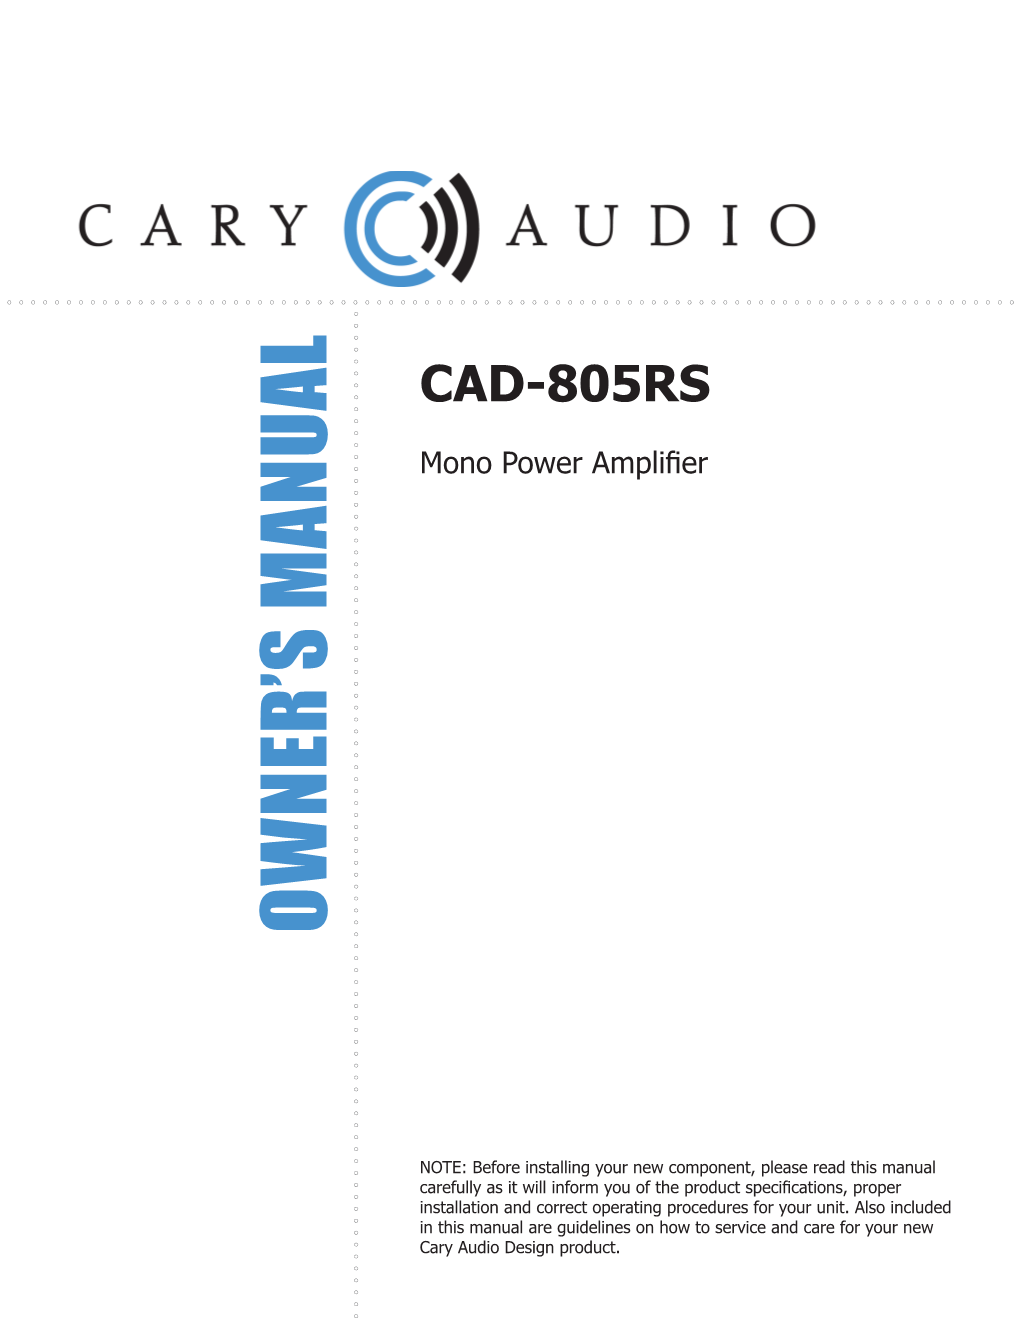 Cad-805Rs Table of Contents